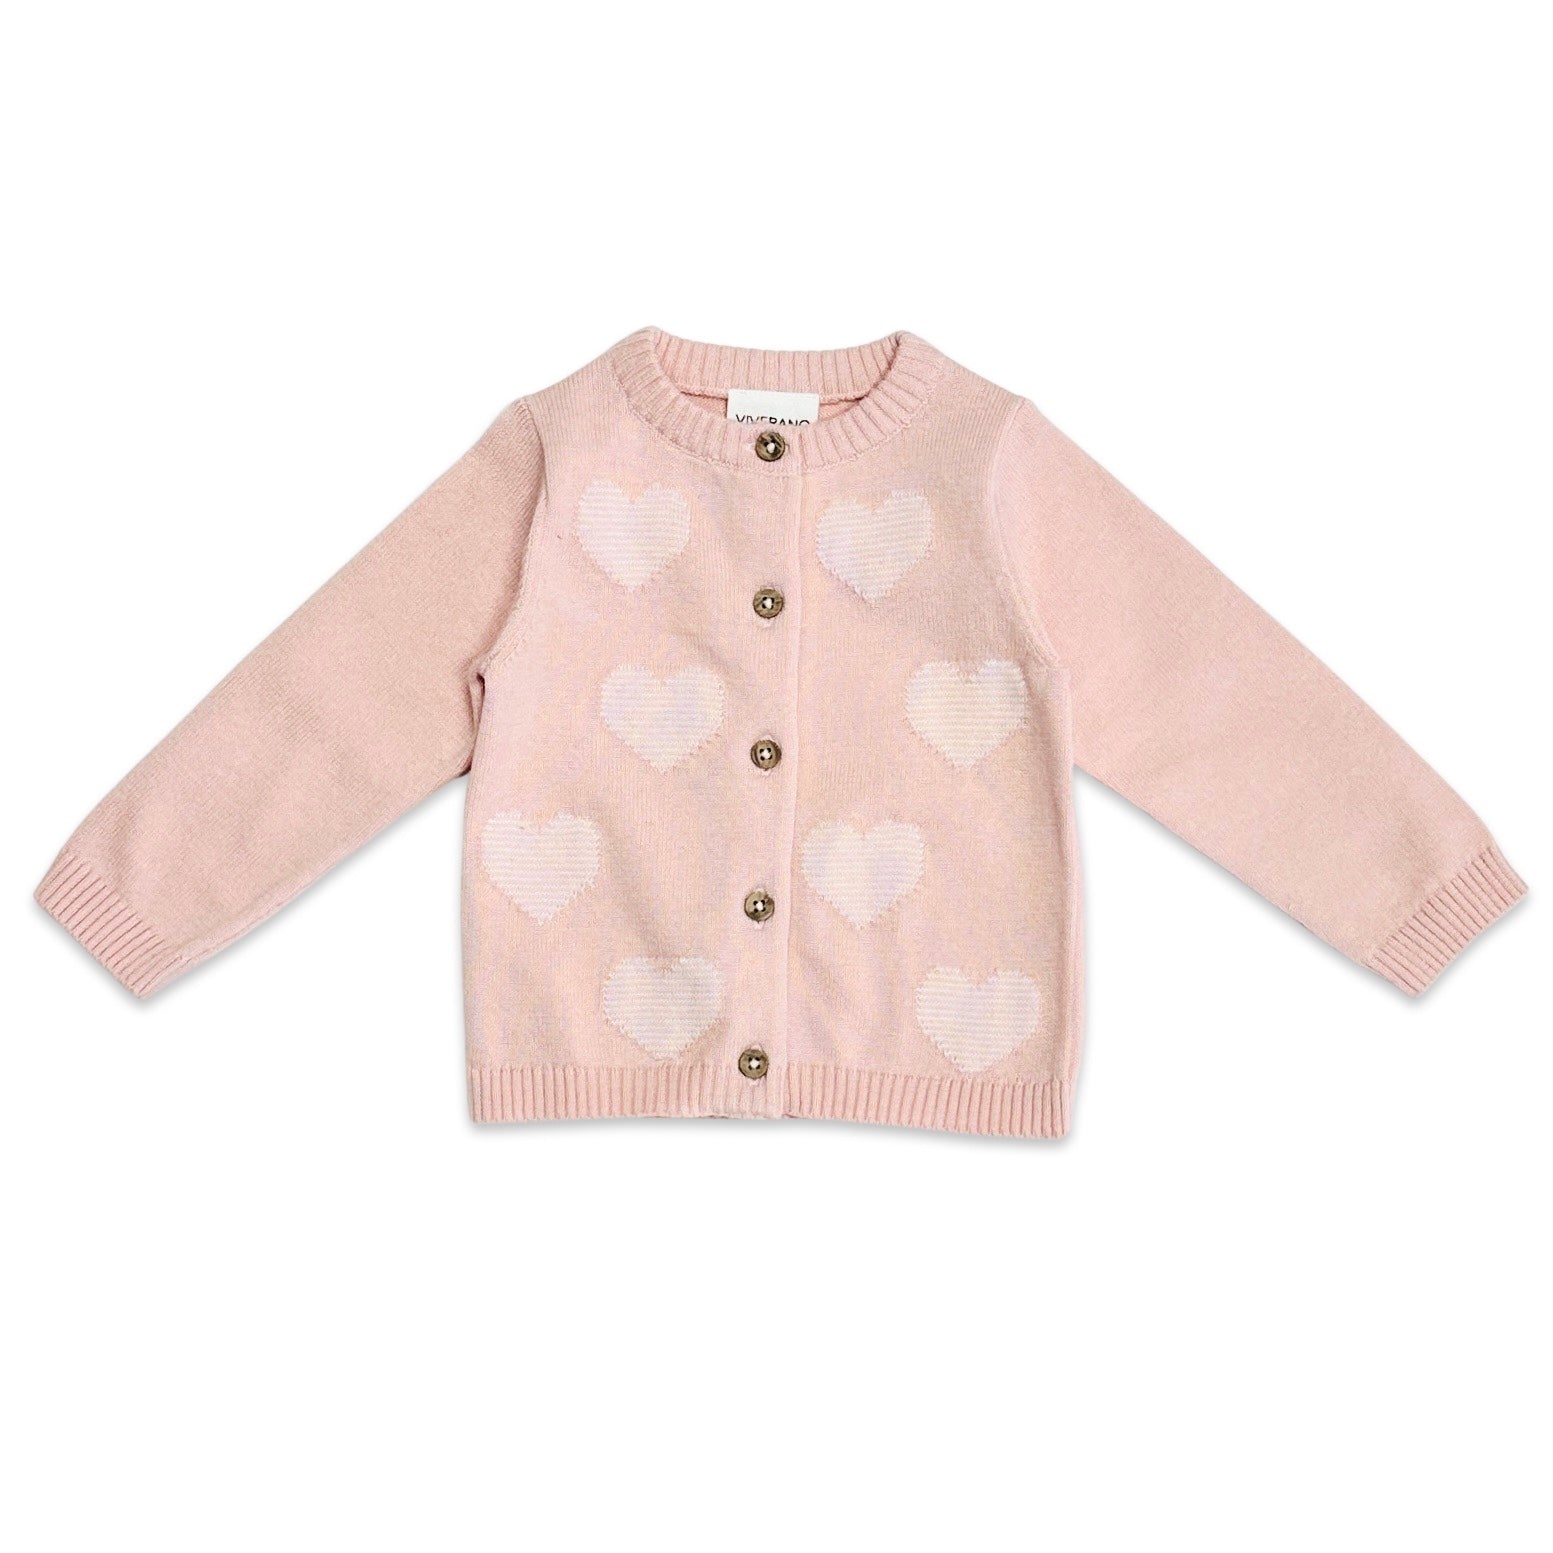 Hearts Jacquard Knit Baby Cardigan - Blush Pink - Twinkle Twinkle Little One